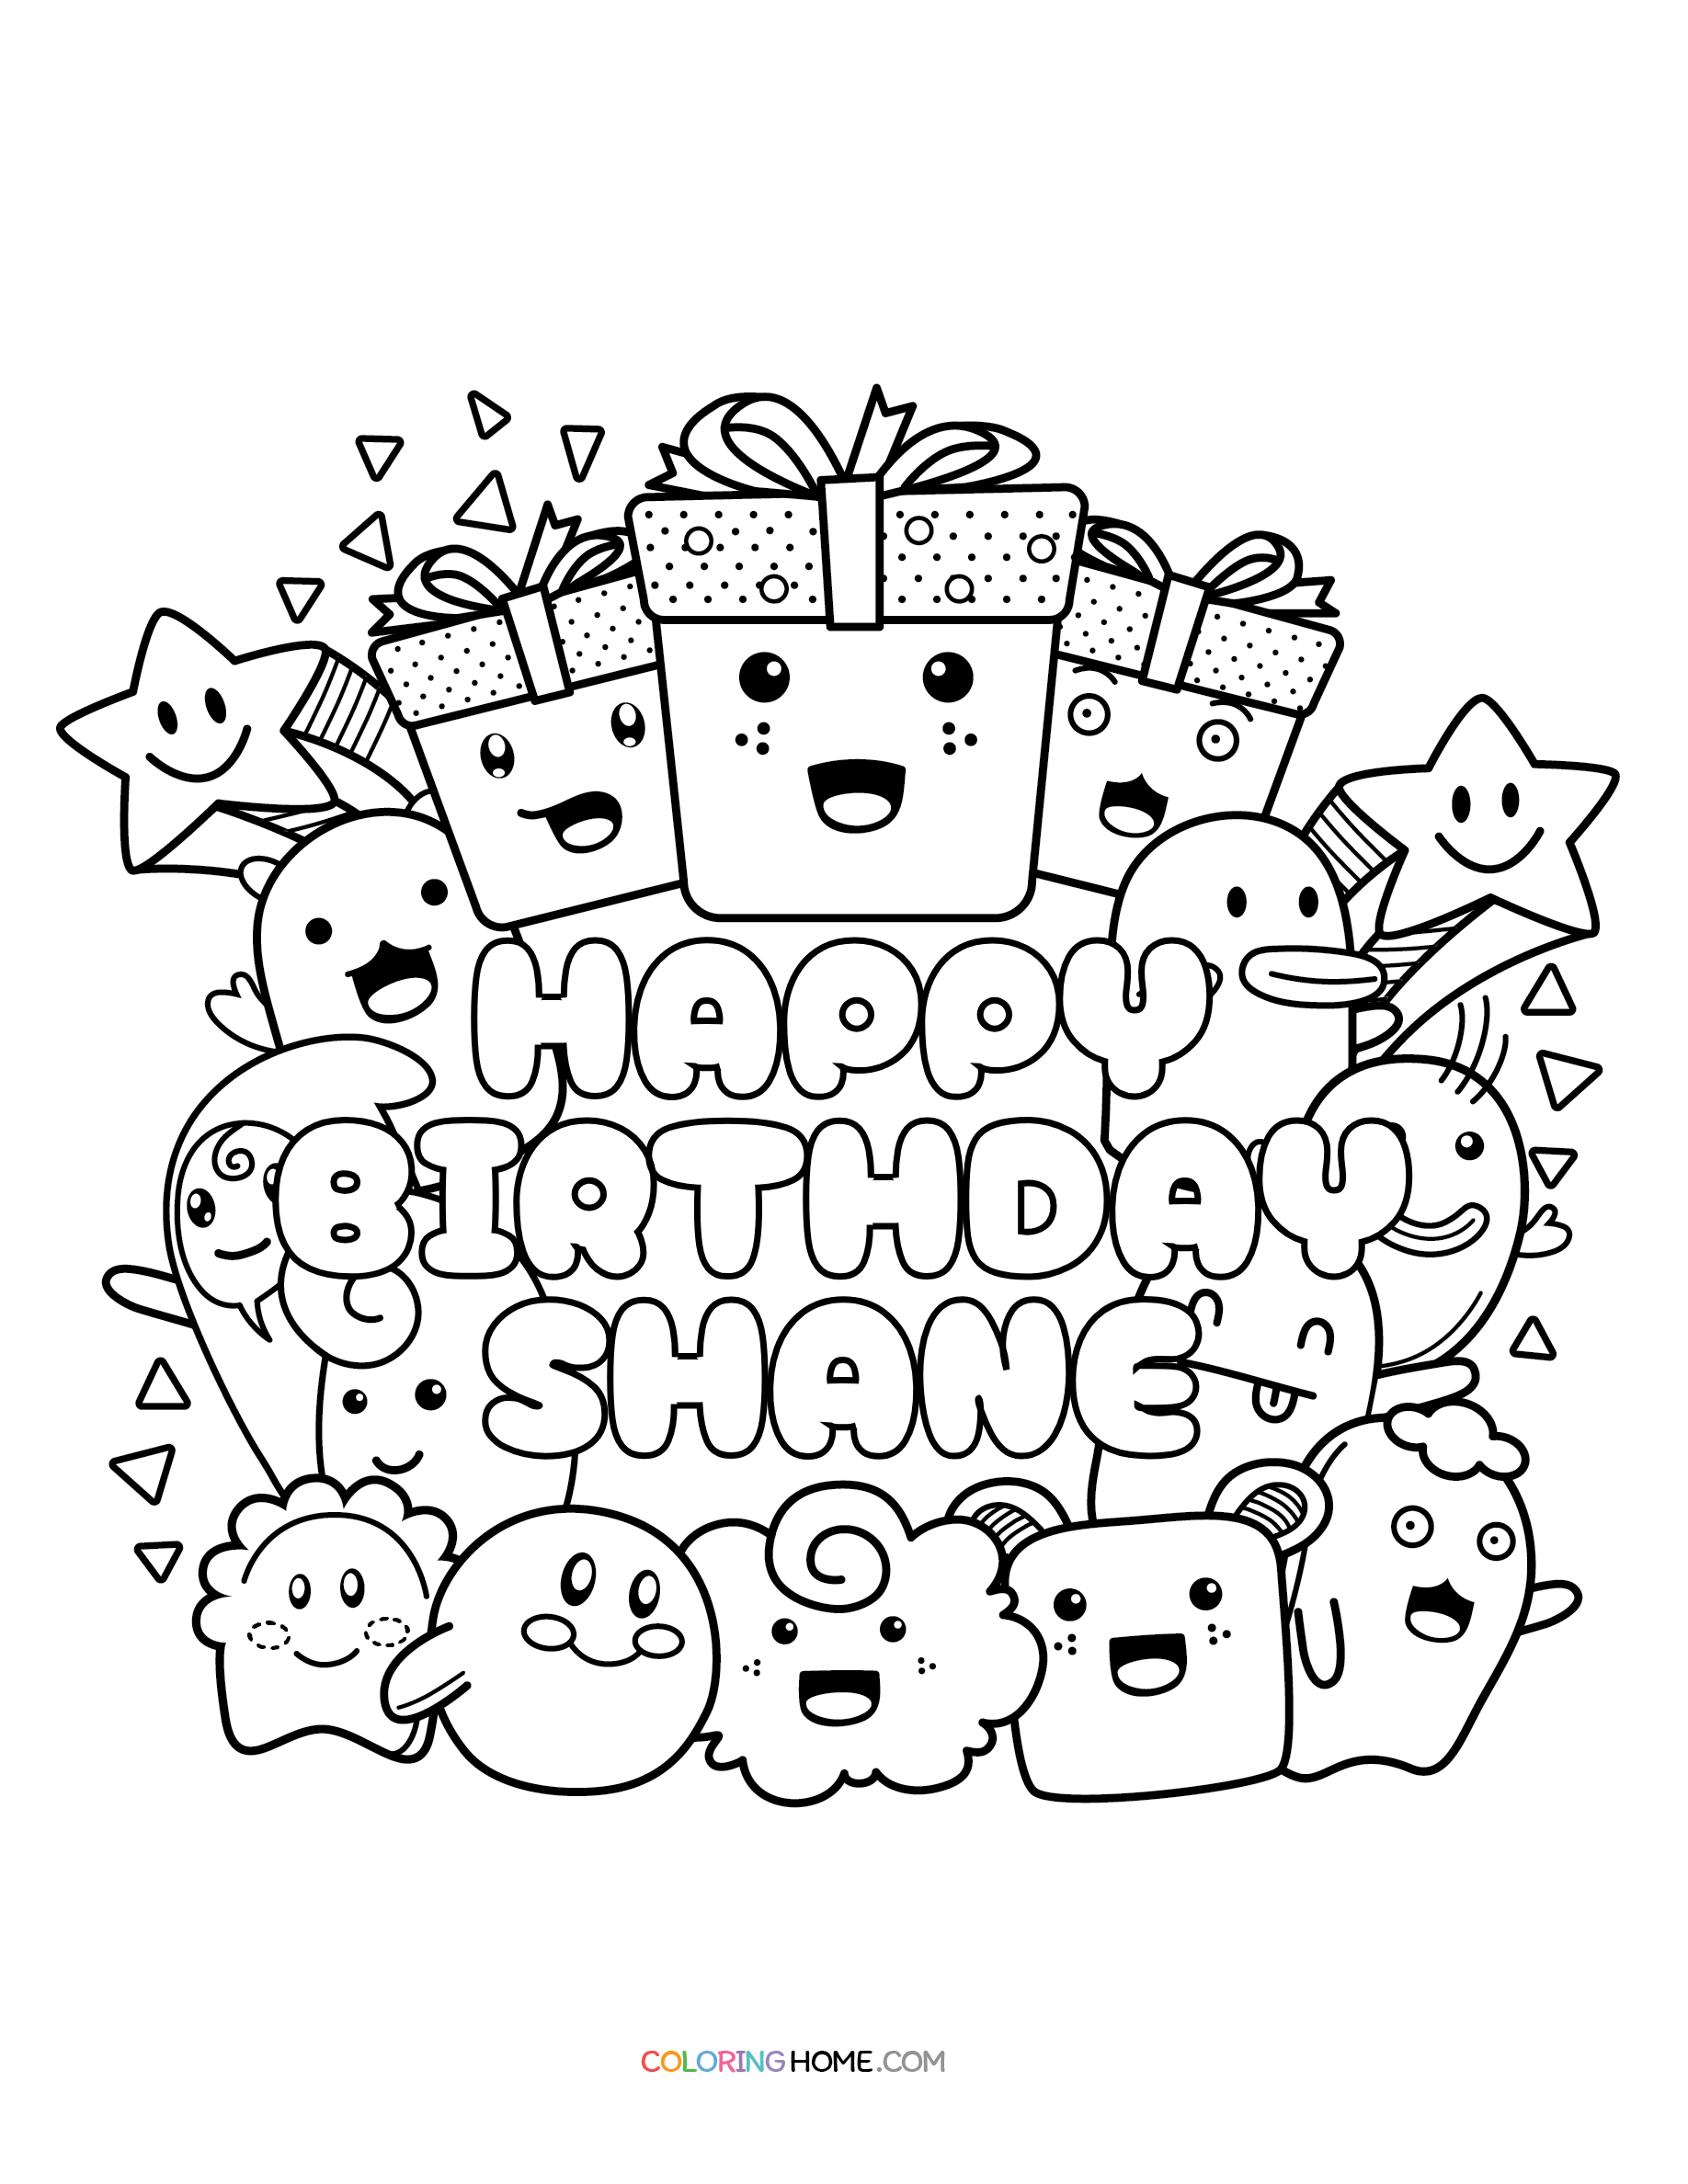 Happy Birthday Shane coloring page